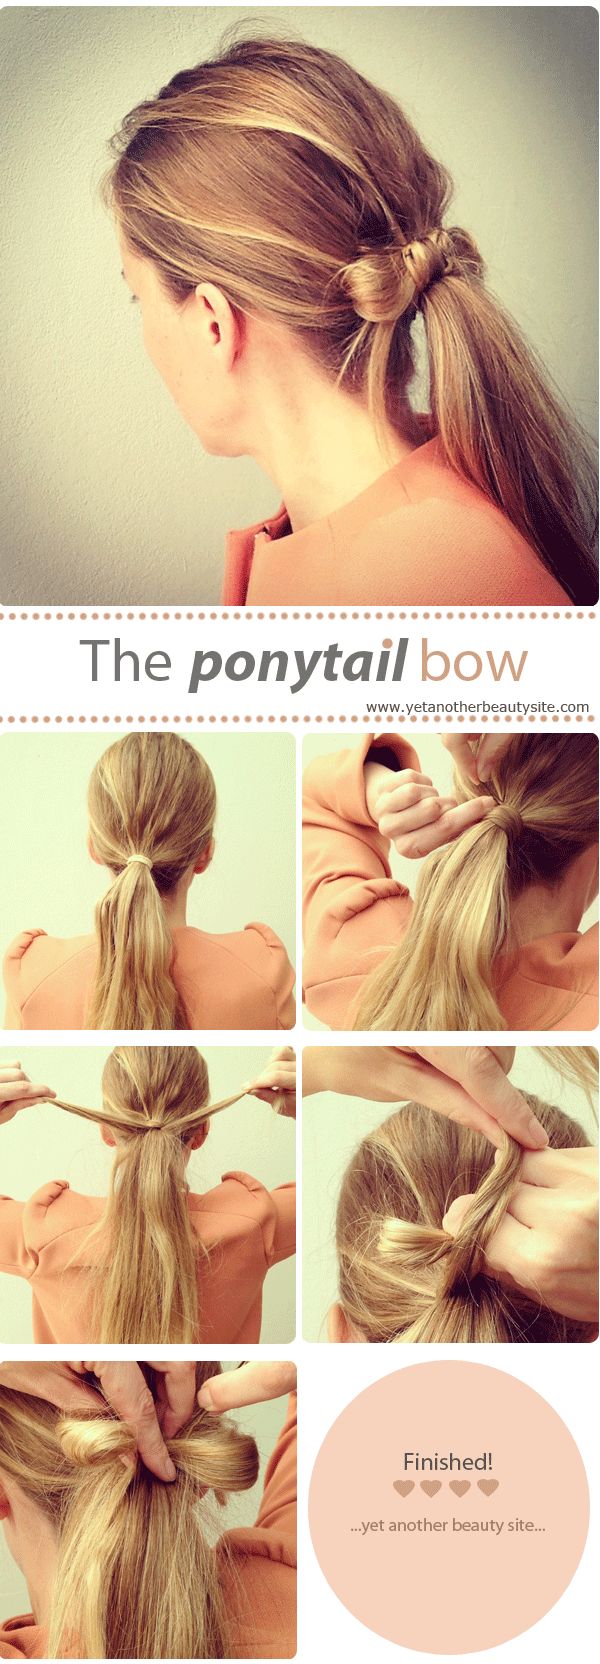 The Pony Bow - 15 Ways to Make Cute Ponytails